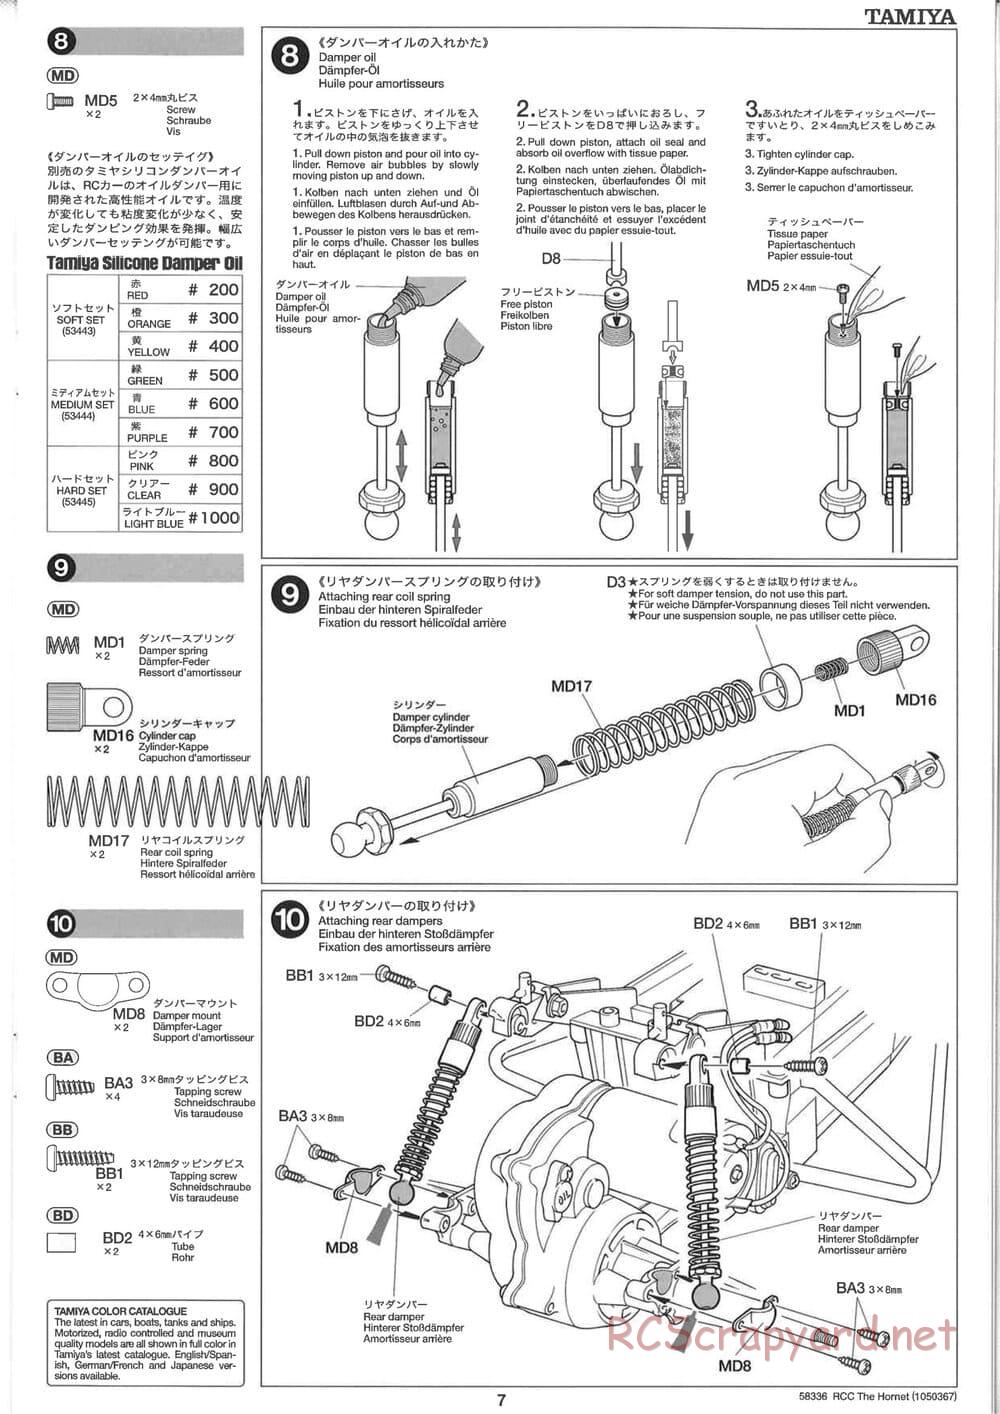 Tamiya - The Hornet (2004) - GH Chassis - Manual - Page 7